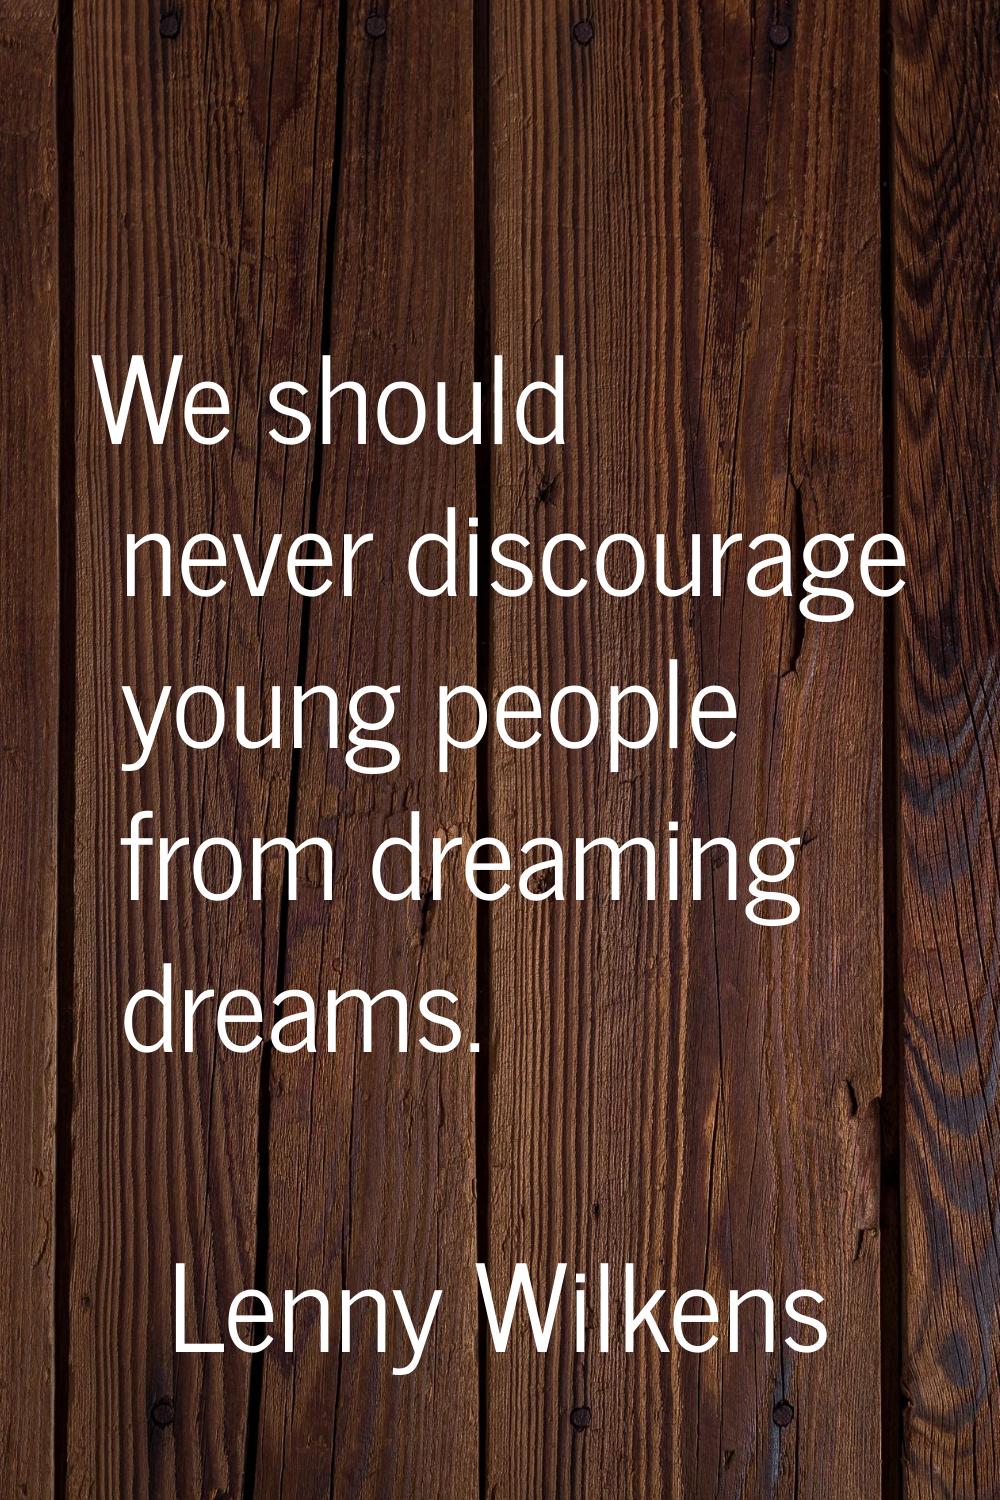 We should never discourage young people from dreaming dreams.